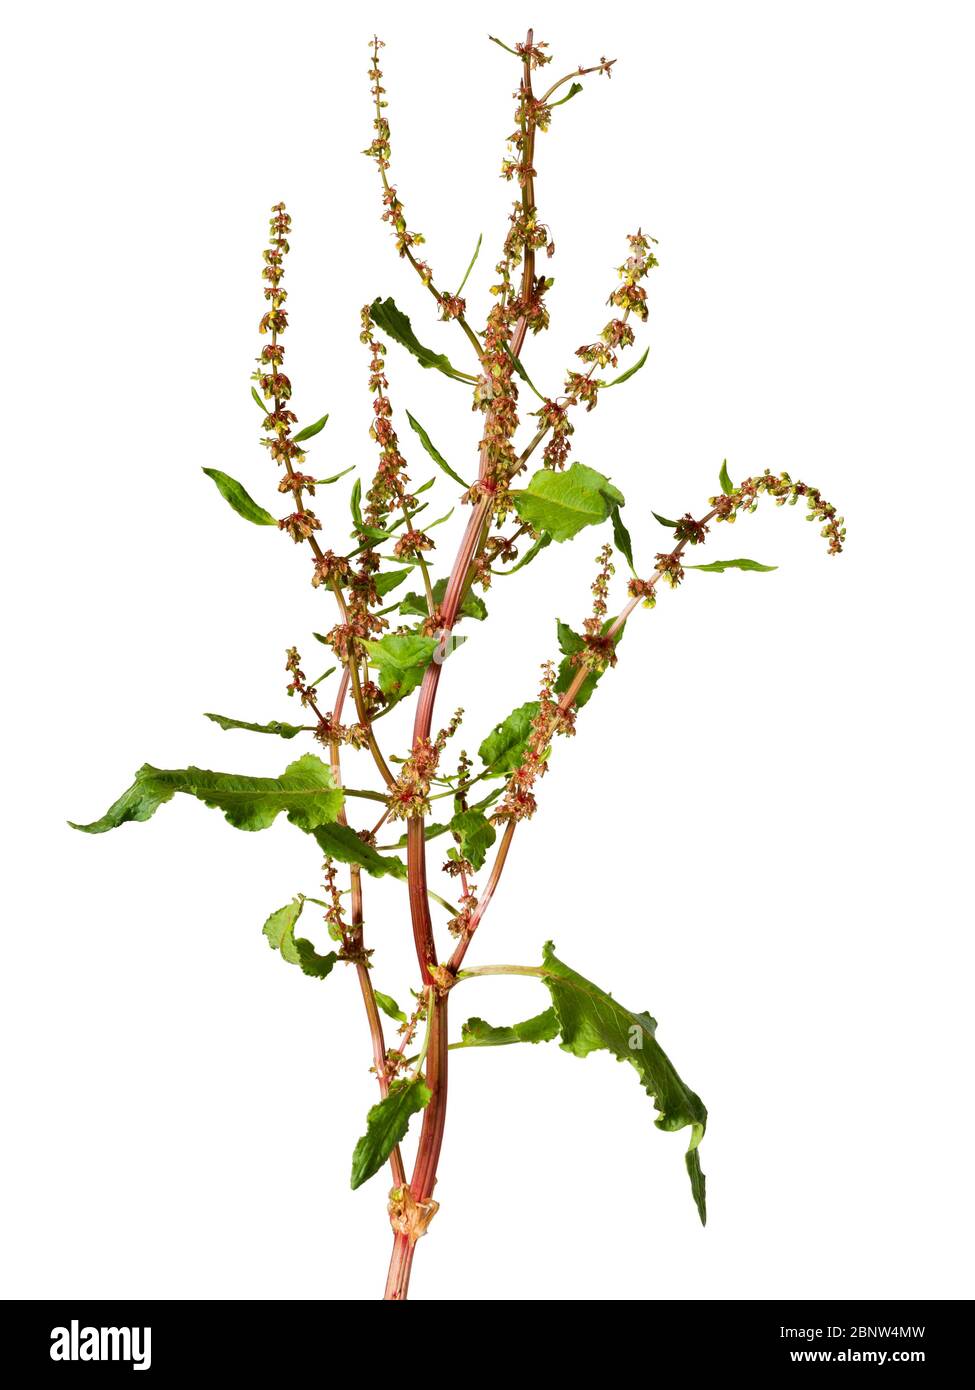 Branched flower spikes of clustered dock, Rumex conglomeratus, on a white background Stock Photo